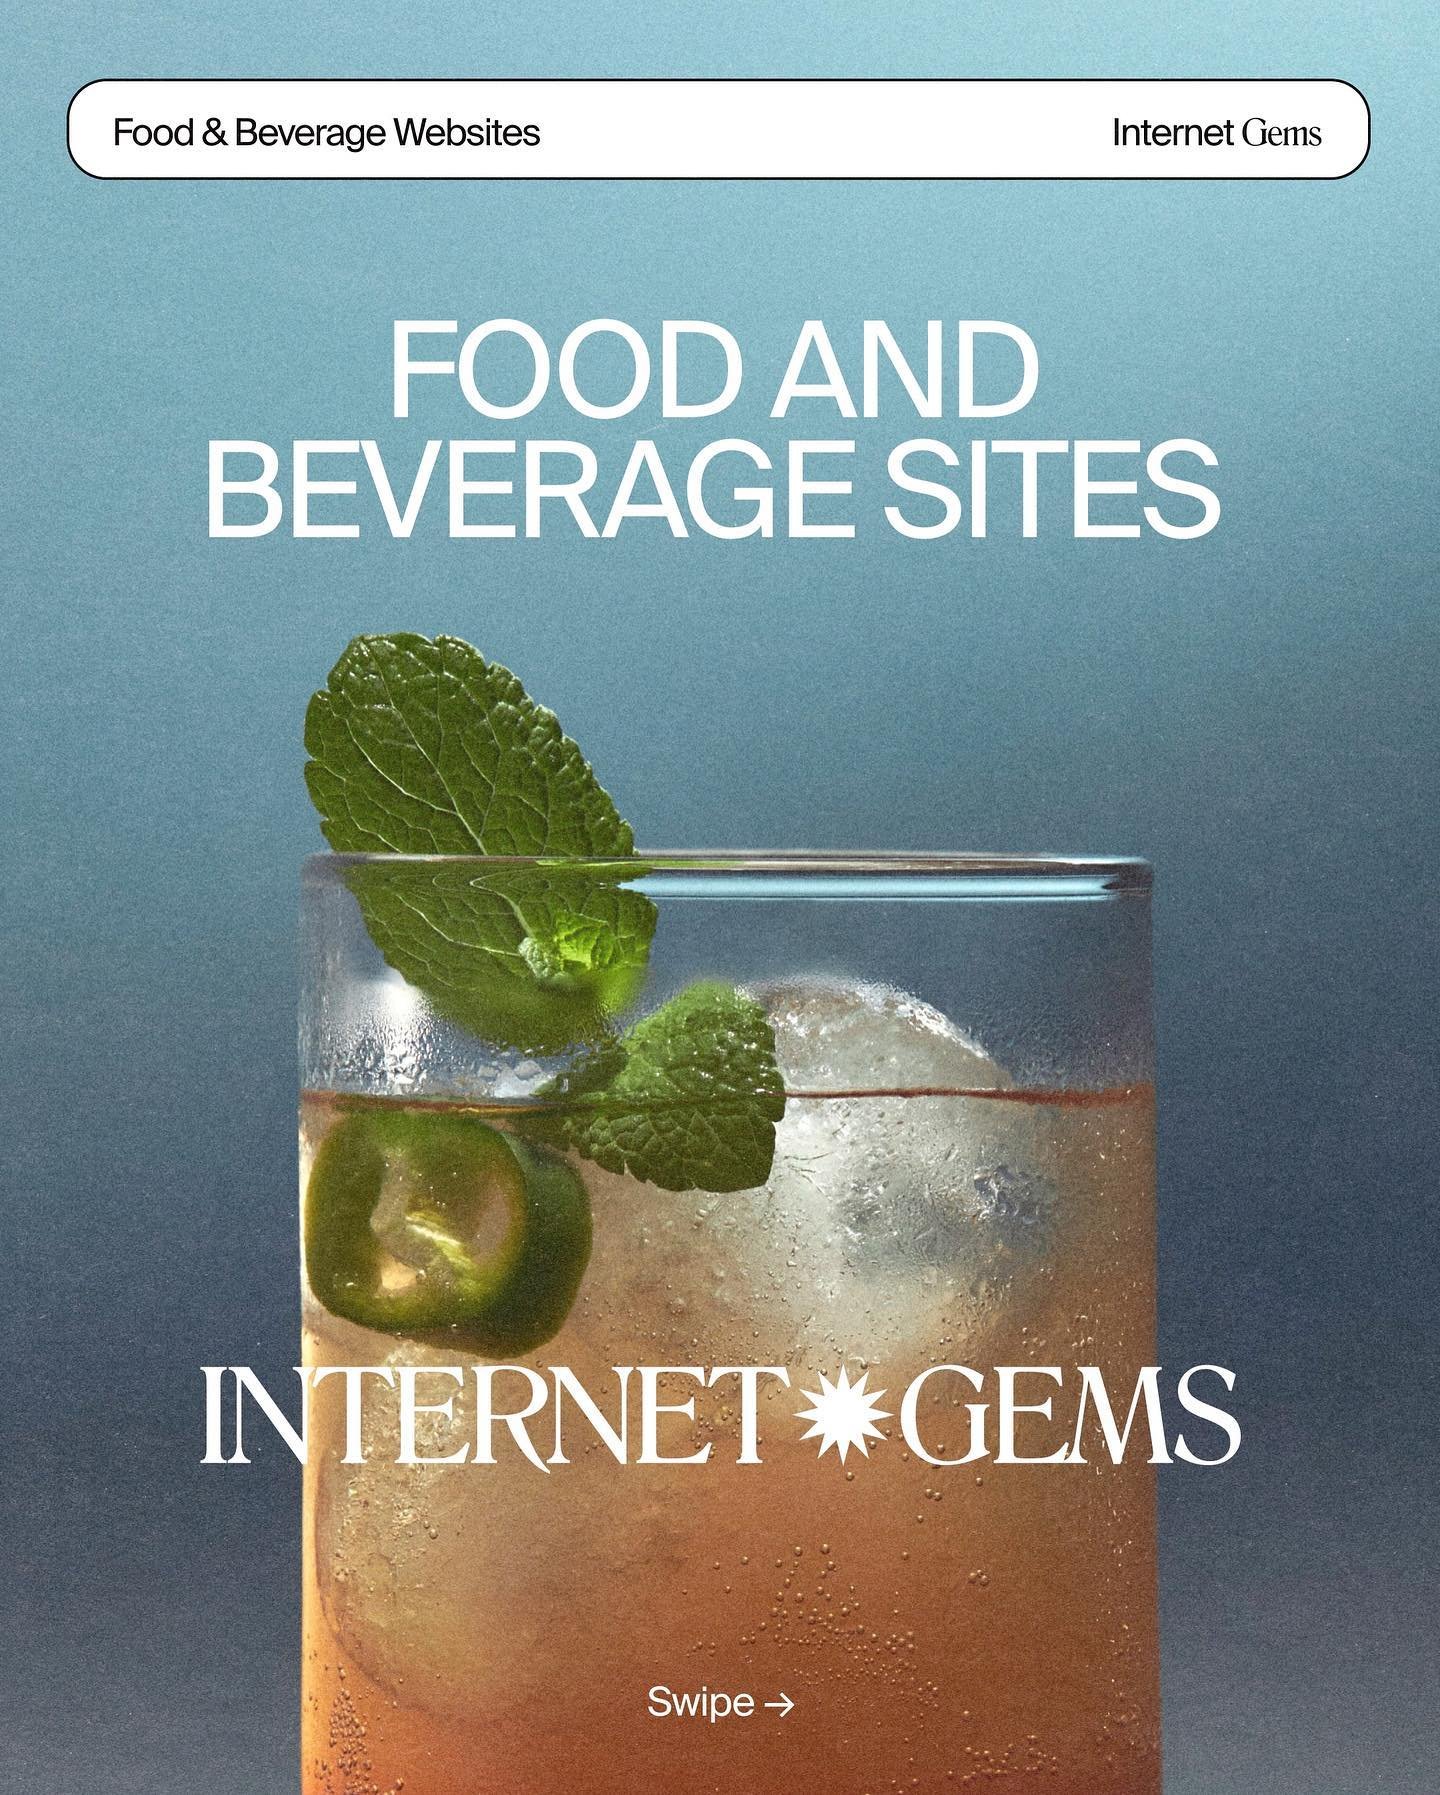 Refreshments, anyone?🍹&nbsp;For this month&rsquo;s Internet Gems 💎, we present you with Food and Beverages sites that have us drooling 🤤

Our April features know exactly how to make the web experience as tasty as the treats they have to offer 😋

